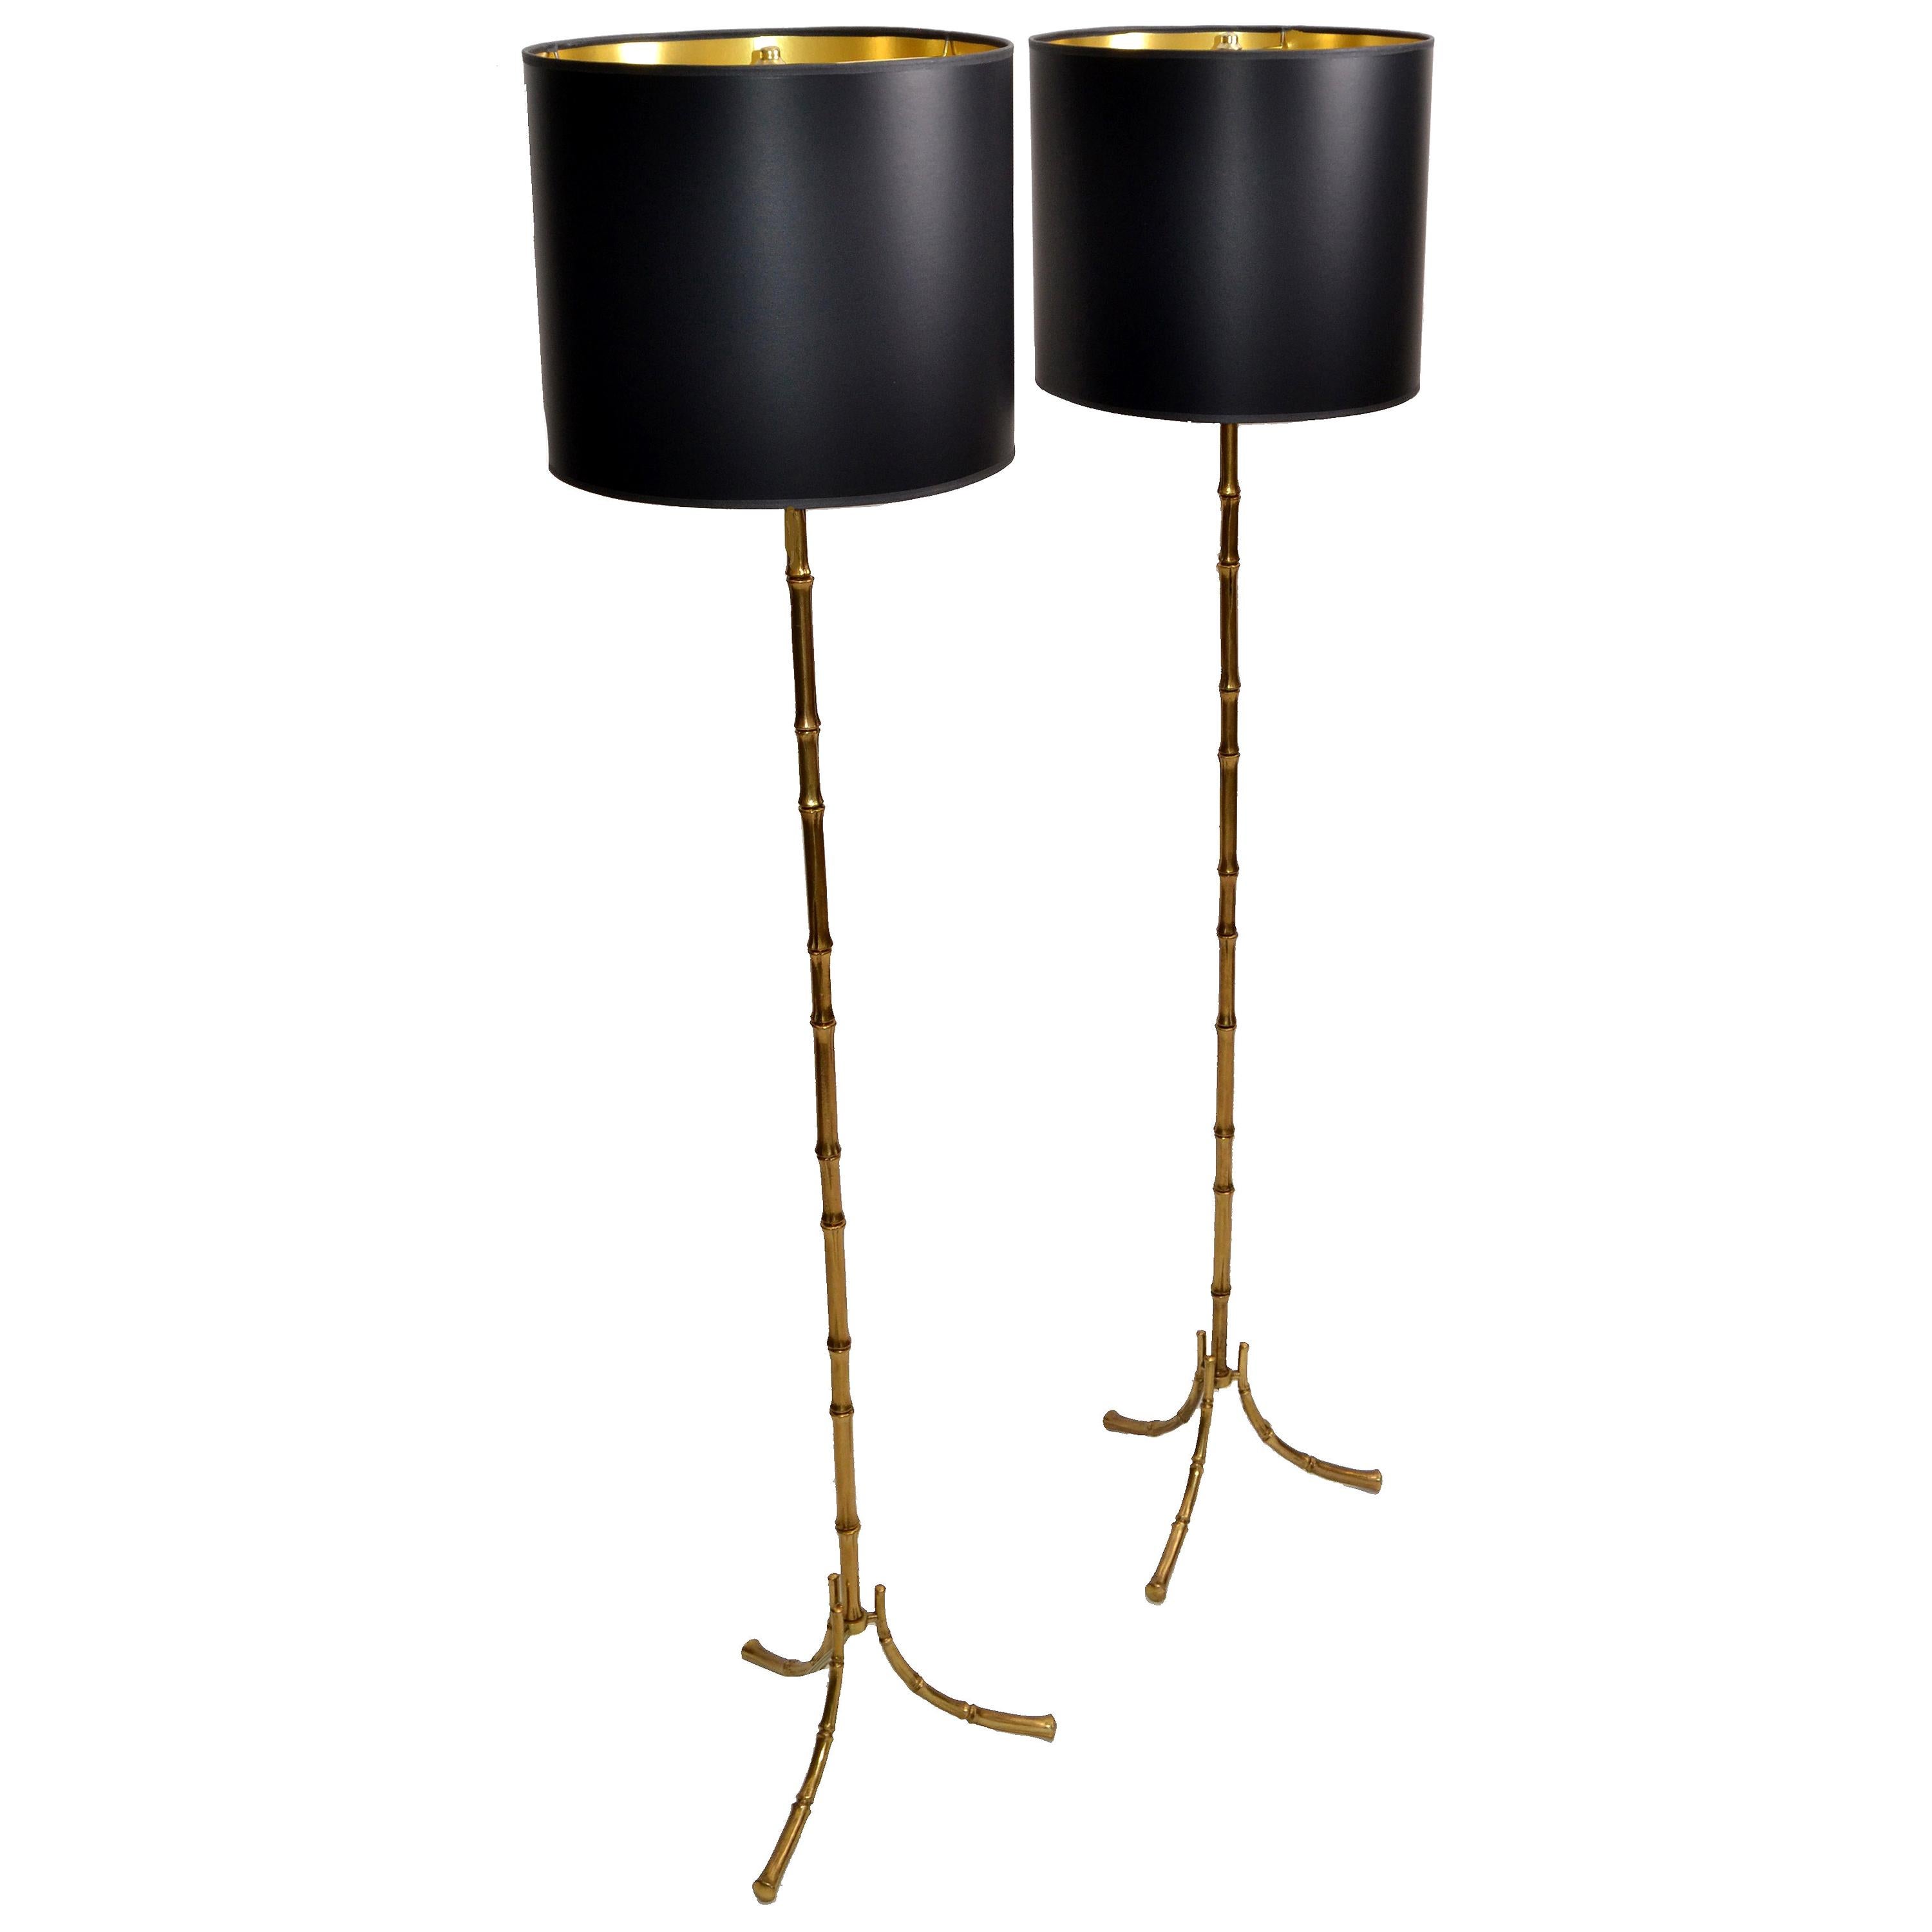 Maison Baguès French Hollywood Regency Bronze Faux Bamboo Floor Lamp 1960 - Pair For Sale